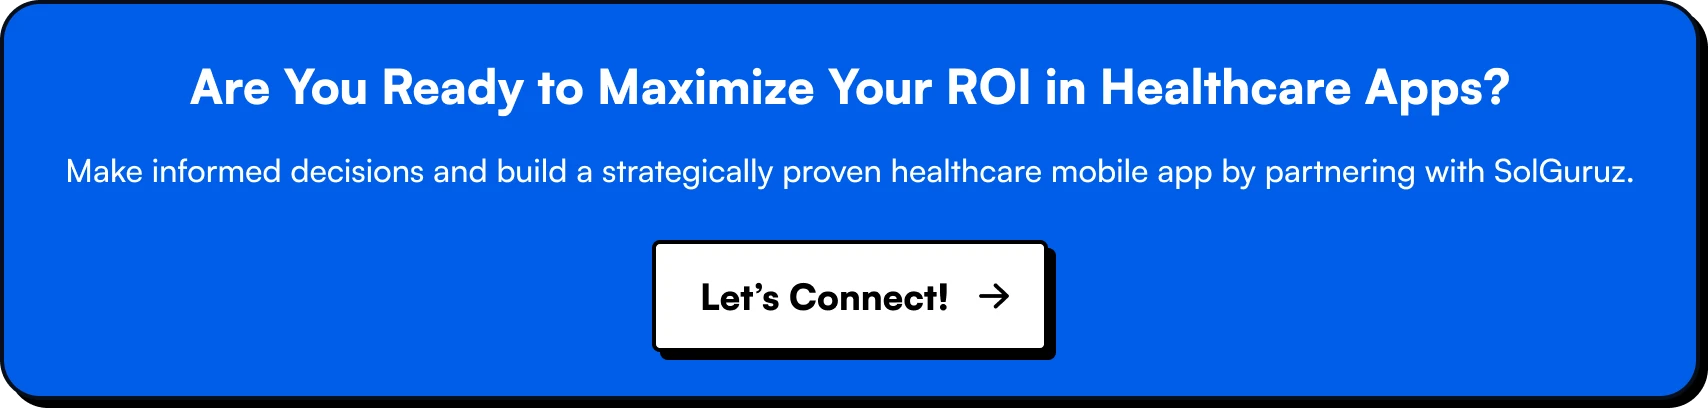 Are You Ready to Maximize Your ROI in Healthcare Apps